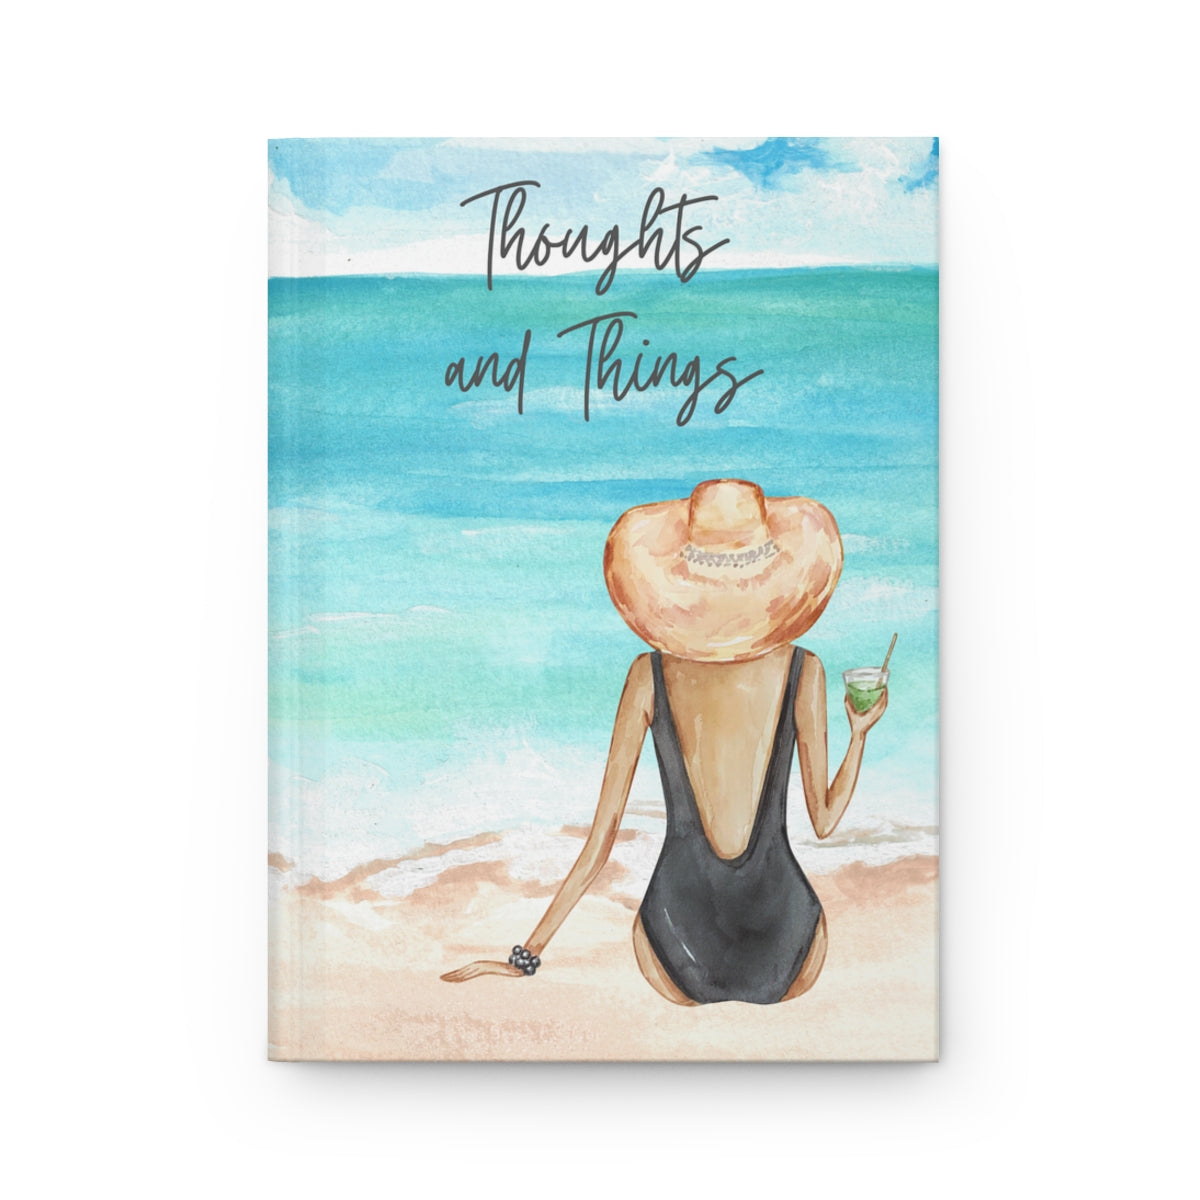 Hard cover notebook, Dotted Paper Journal, Beach Watercolor Journal, Thoughts & Things Journal, Lined Notebook, Lined Journal, Stationery - The Good Life Vibe